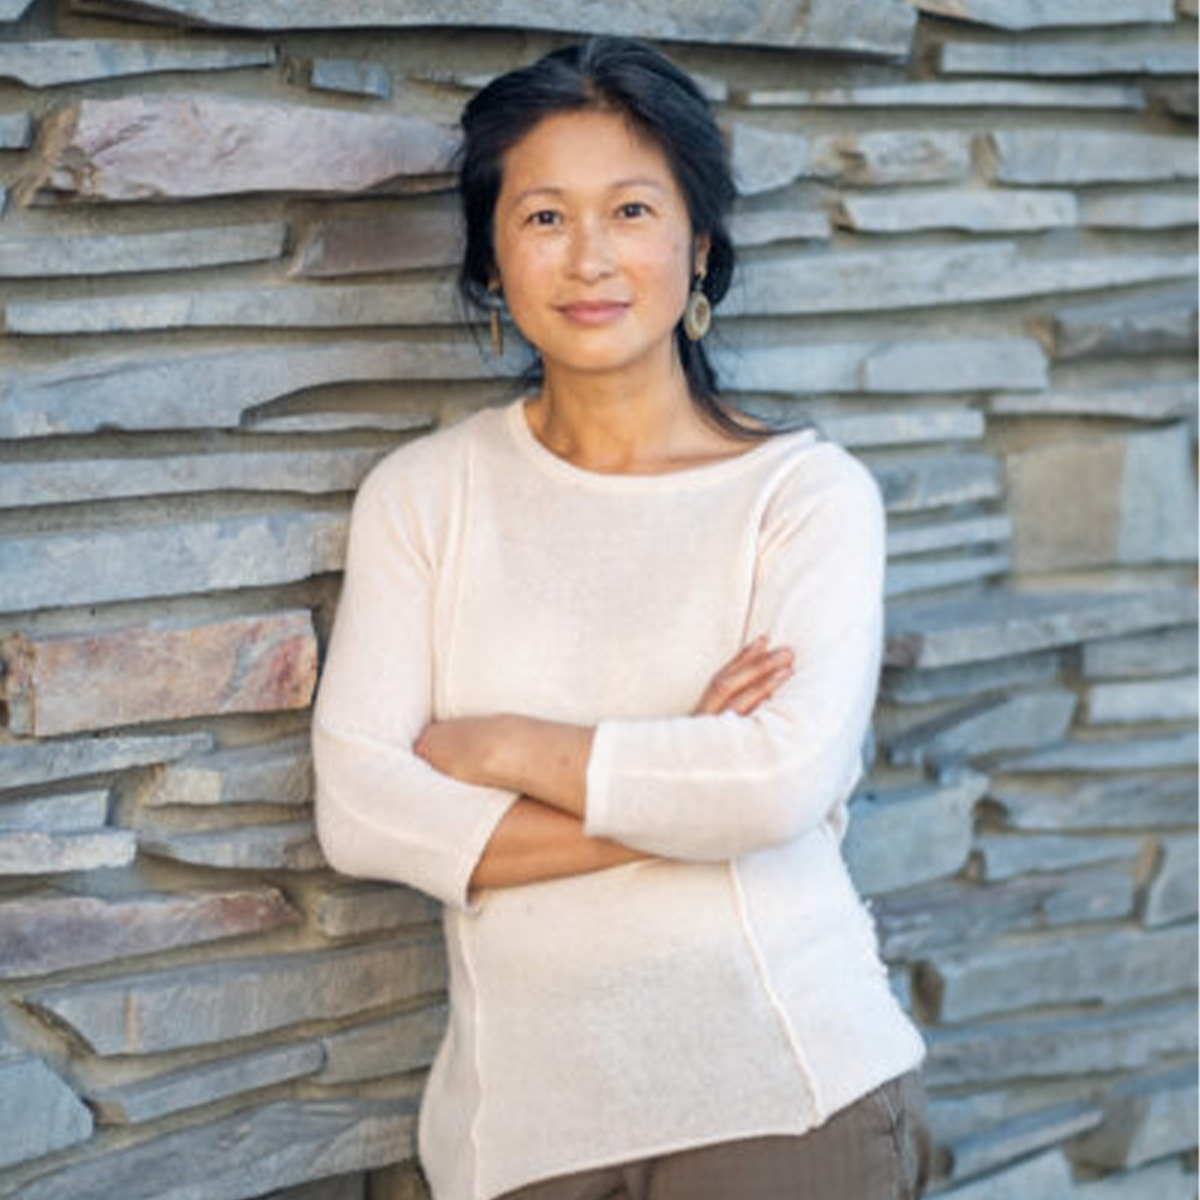 Linda Thai color portrait. Linda is a Vietnamese woman who is standing and leaning against a stone wall. Her arms are crossed in front of her and is smiling.